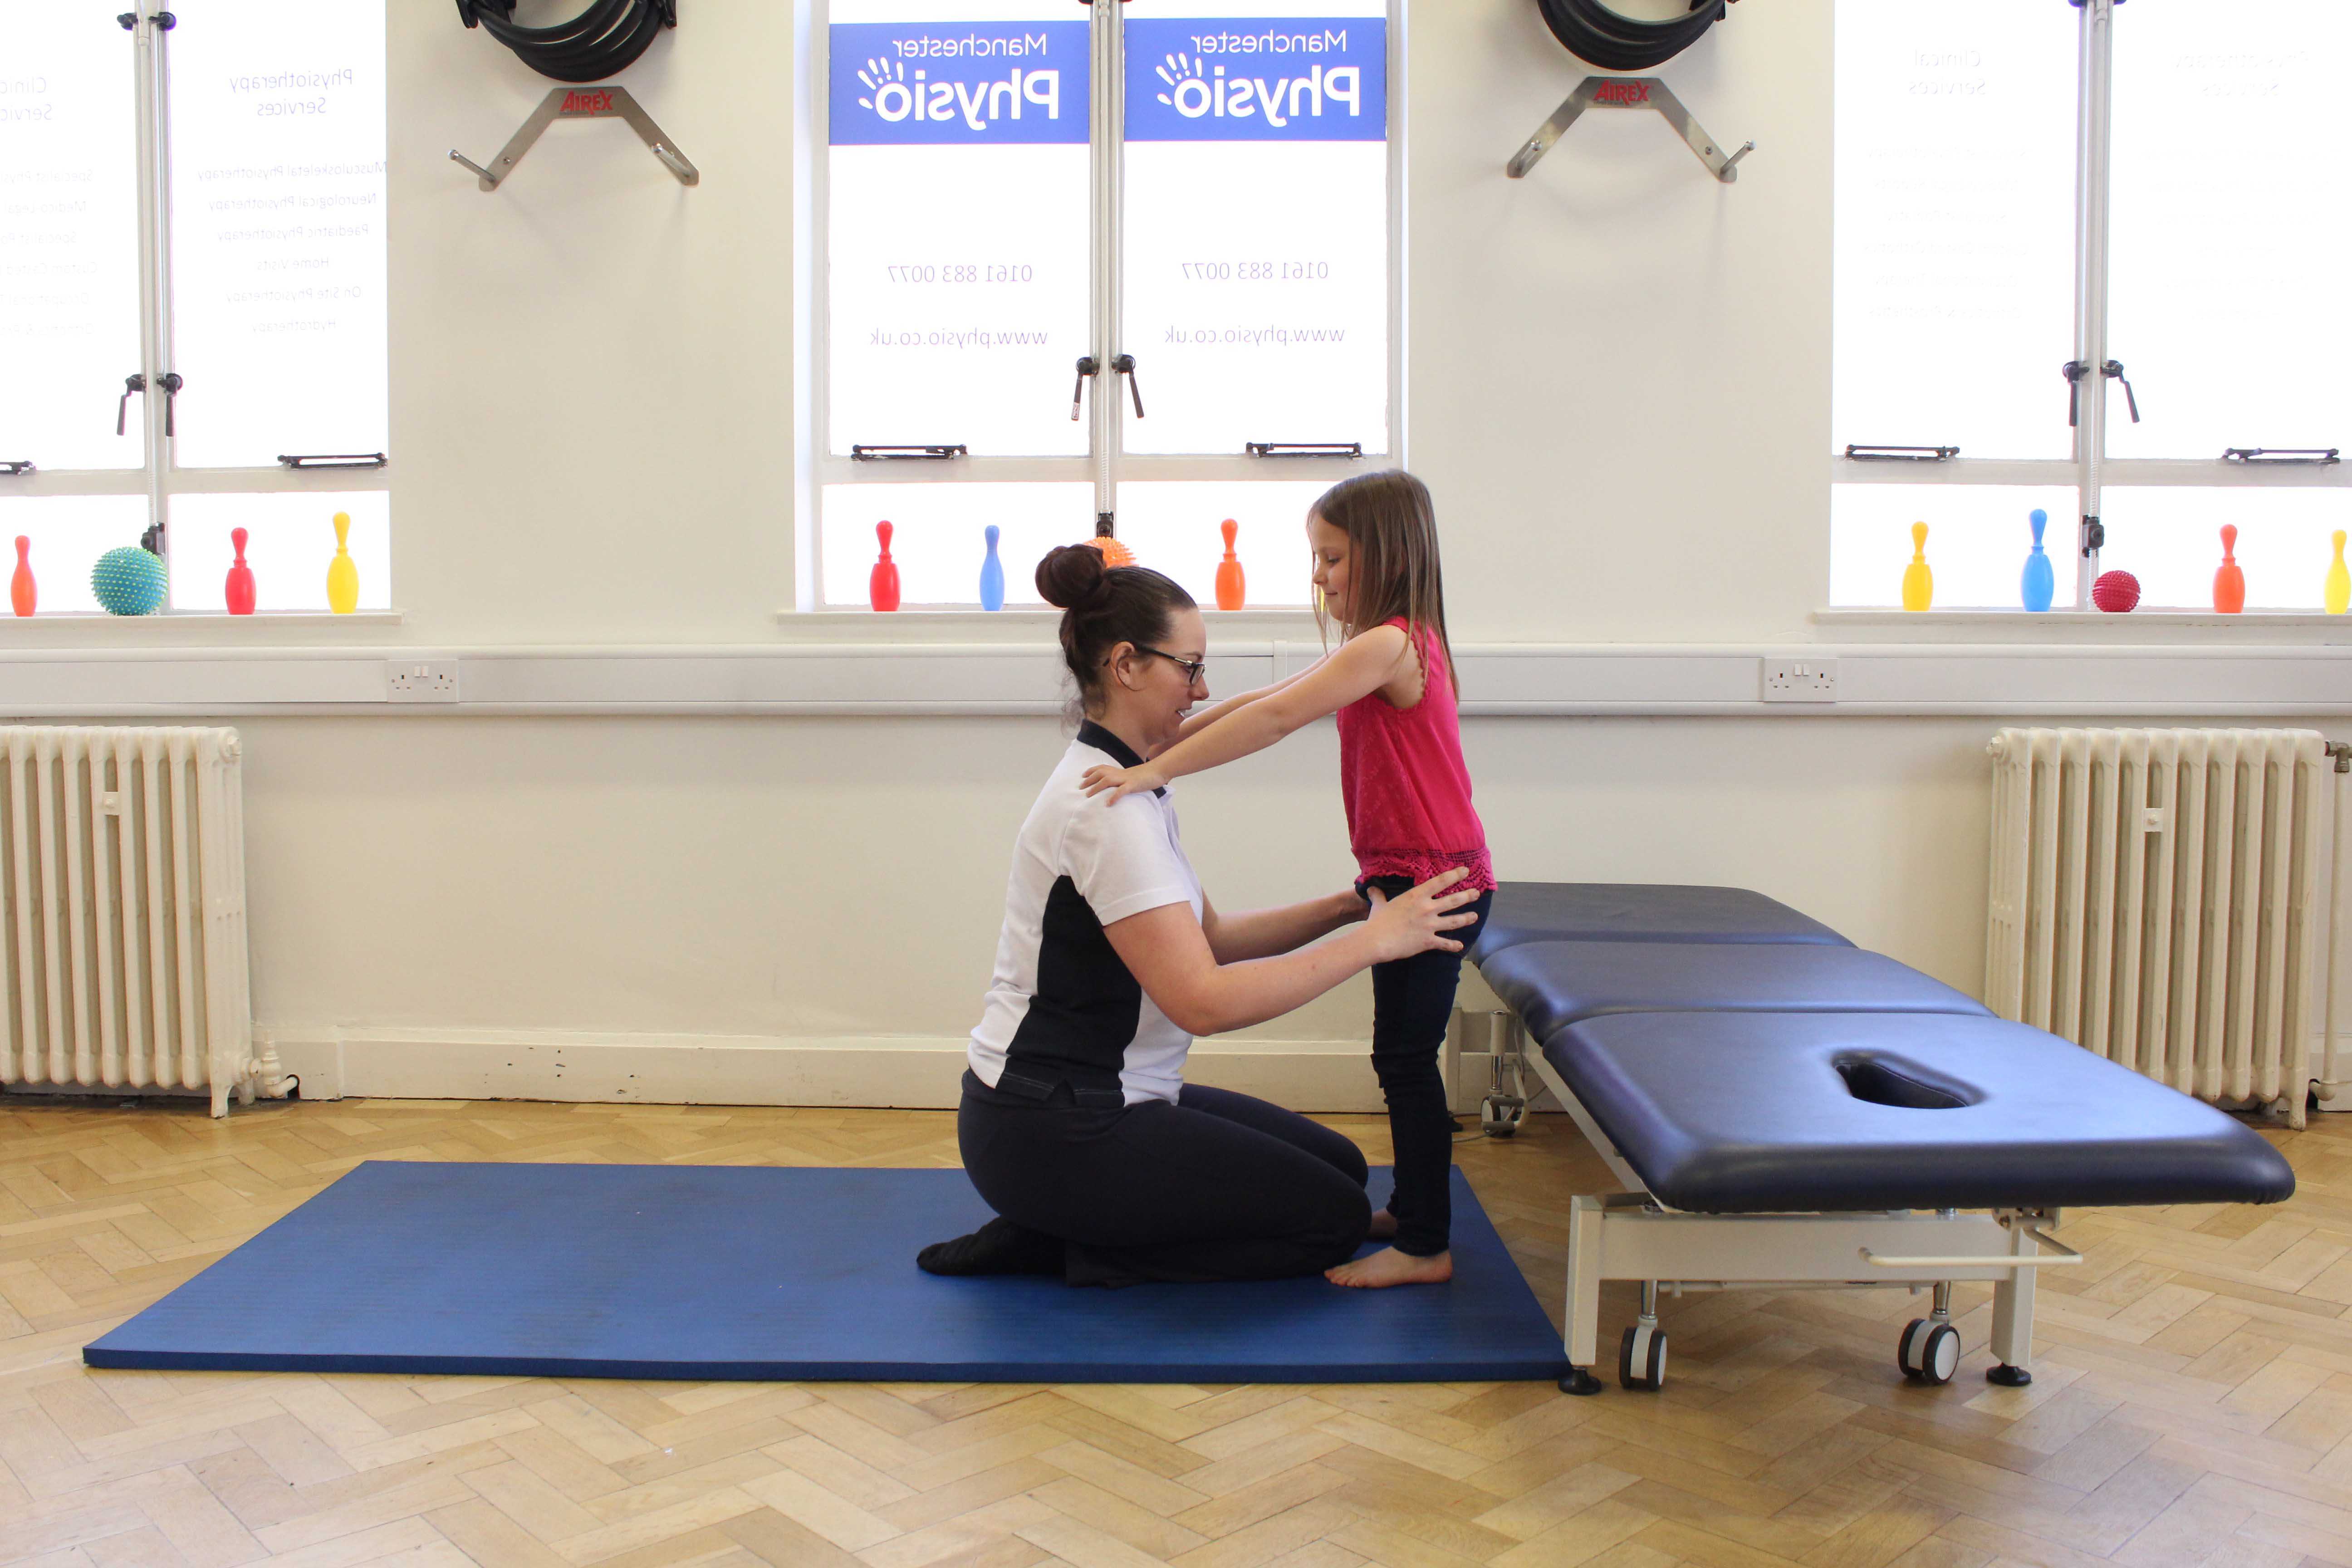 strength and stretching rehabilitation exercises guided by paediatric physiotherapist